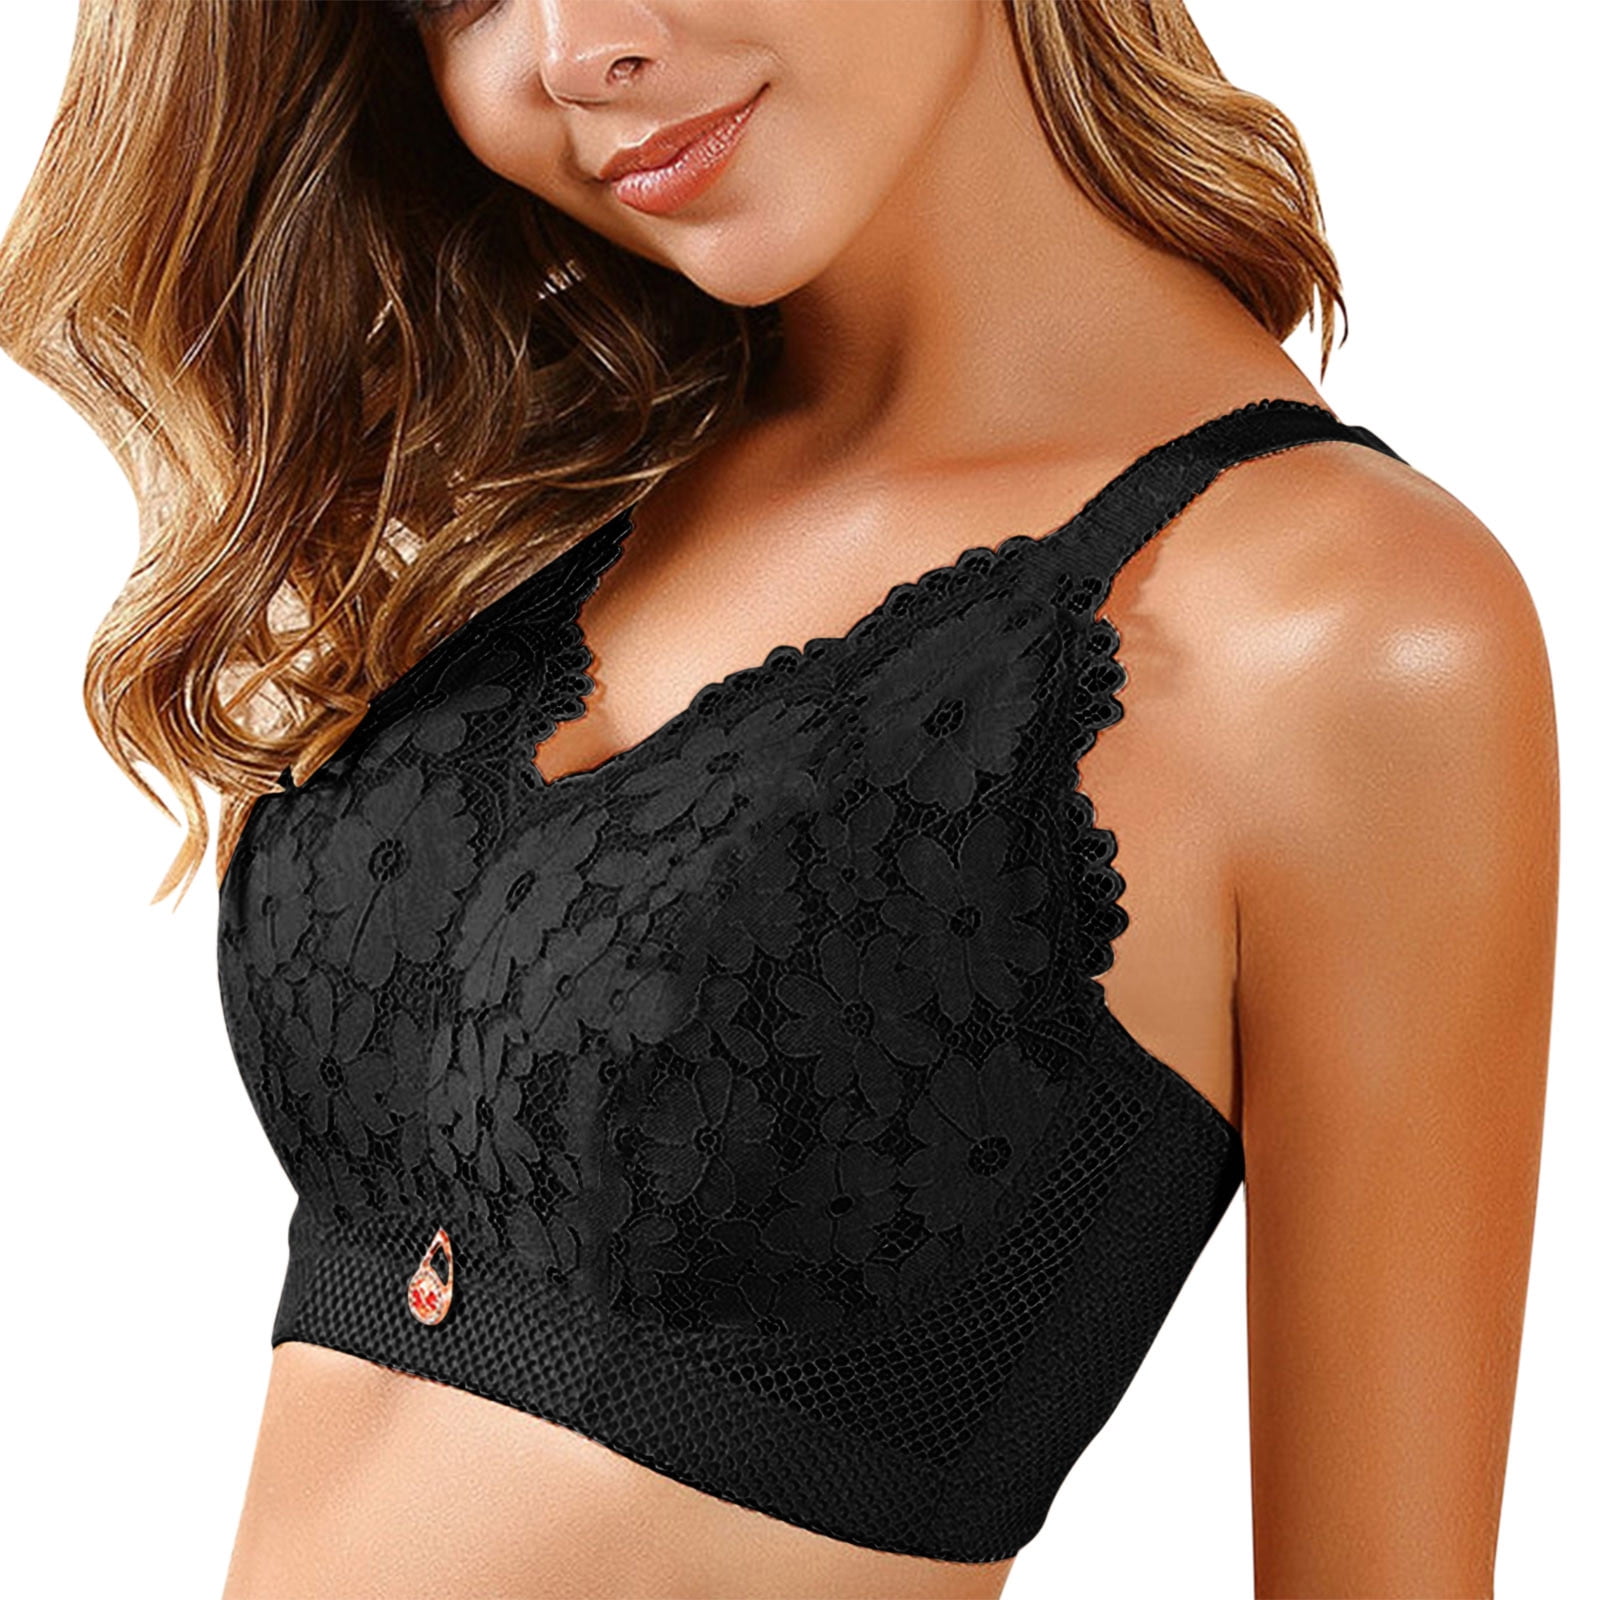 Large Size Full-Coverage Bra for Women Seamless Push Up Lace Sports Bra  Comfortable Breathable Base Tops Underwear Gift for Women 50% off Clearance  